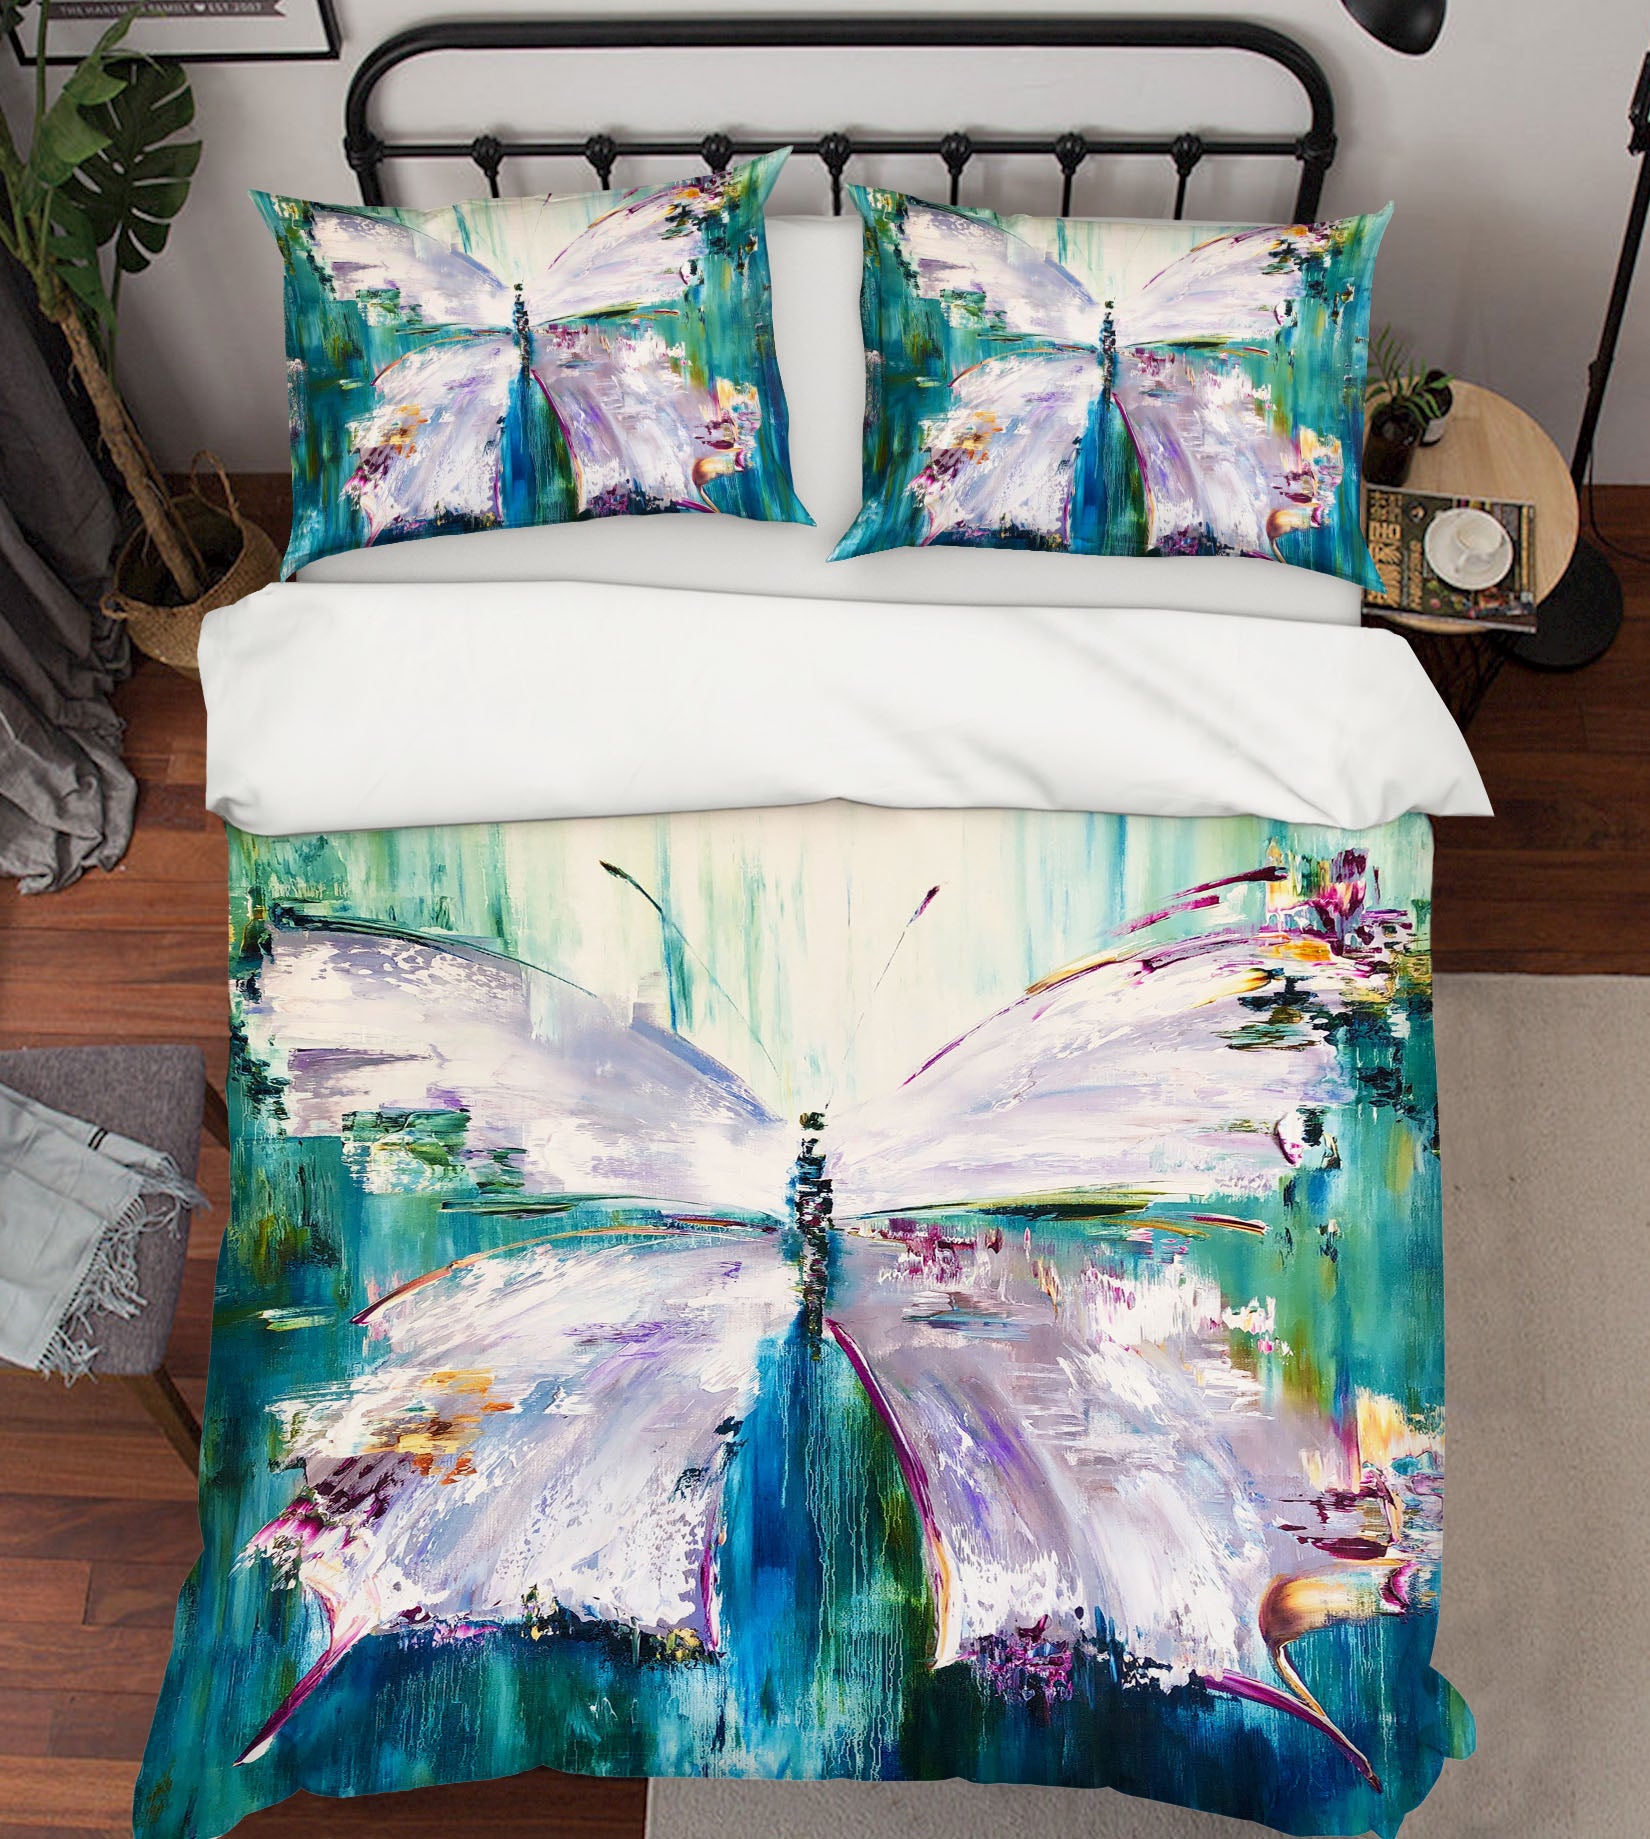 3D Painted Butterfly 545 Skromova Marina Bedding Bed Pillowcases Quilt